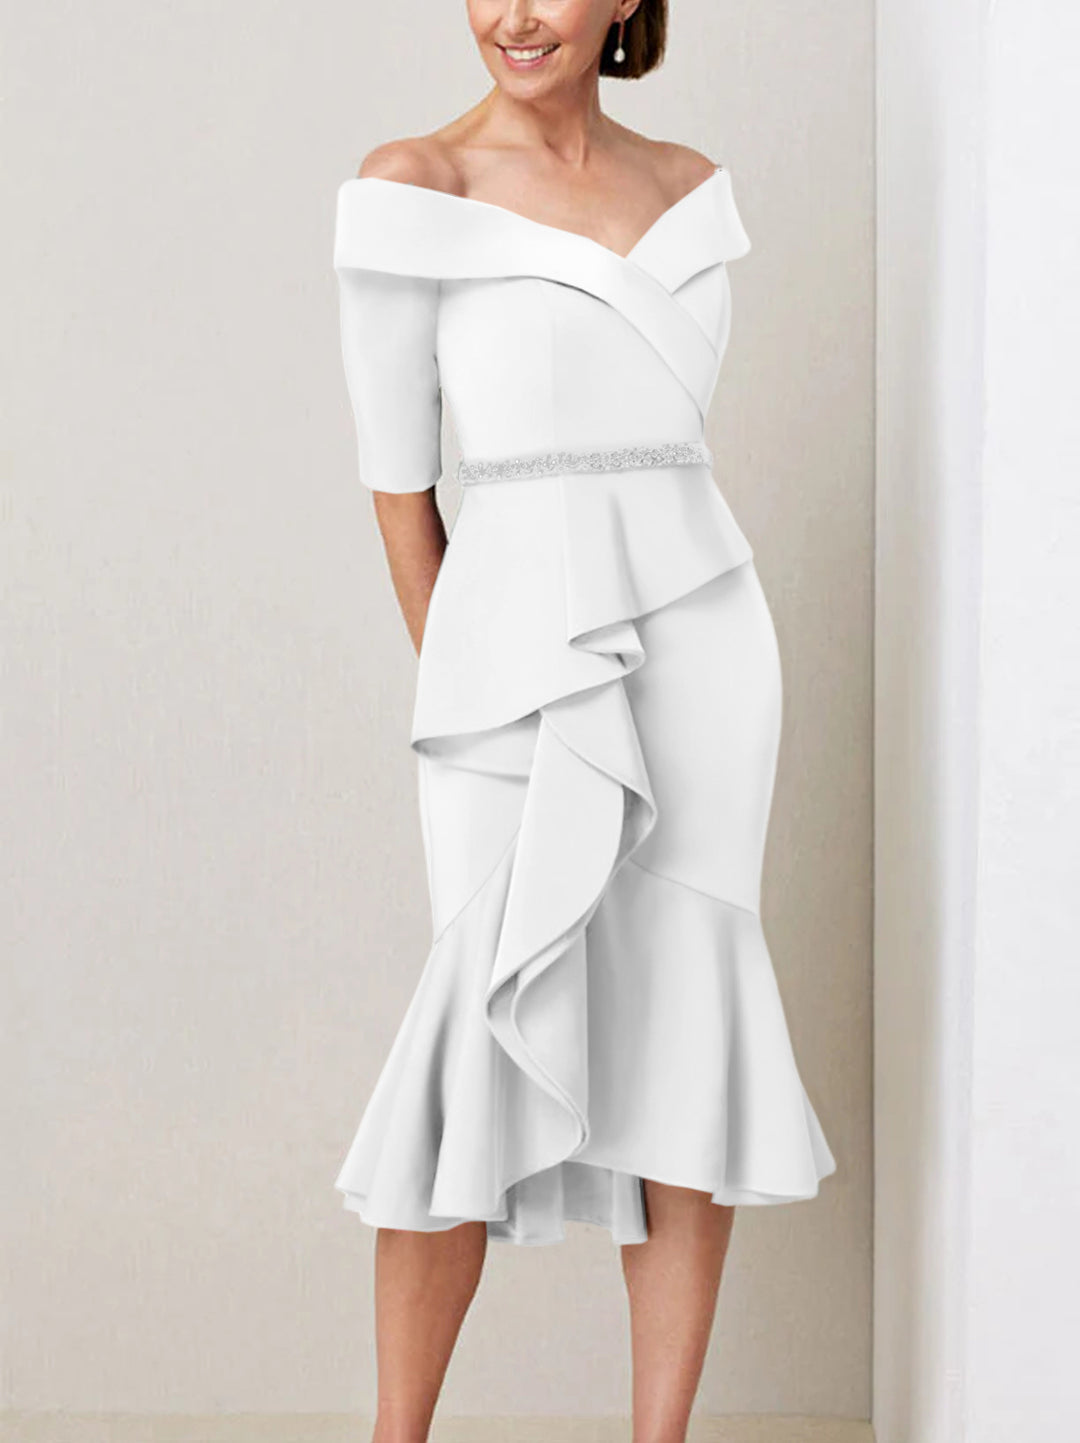 Sheath/Column Off-the-Shoulder Half Sleeves Mother of the Bride Dresses with Beading & Ruffles